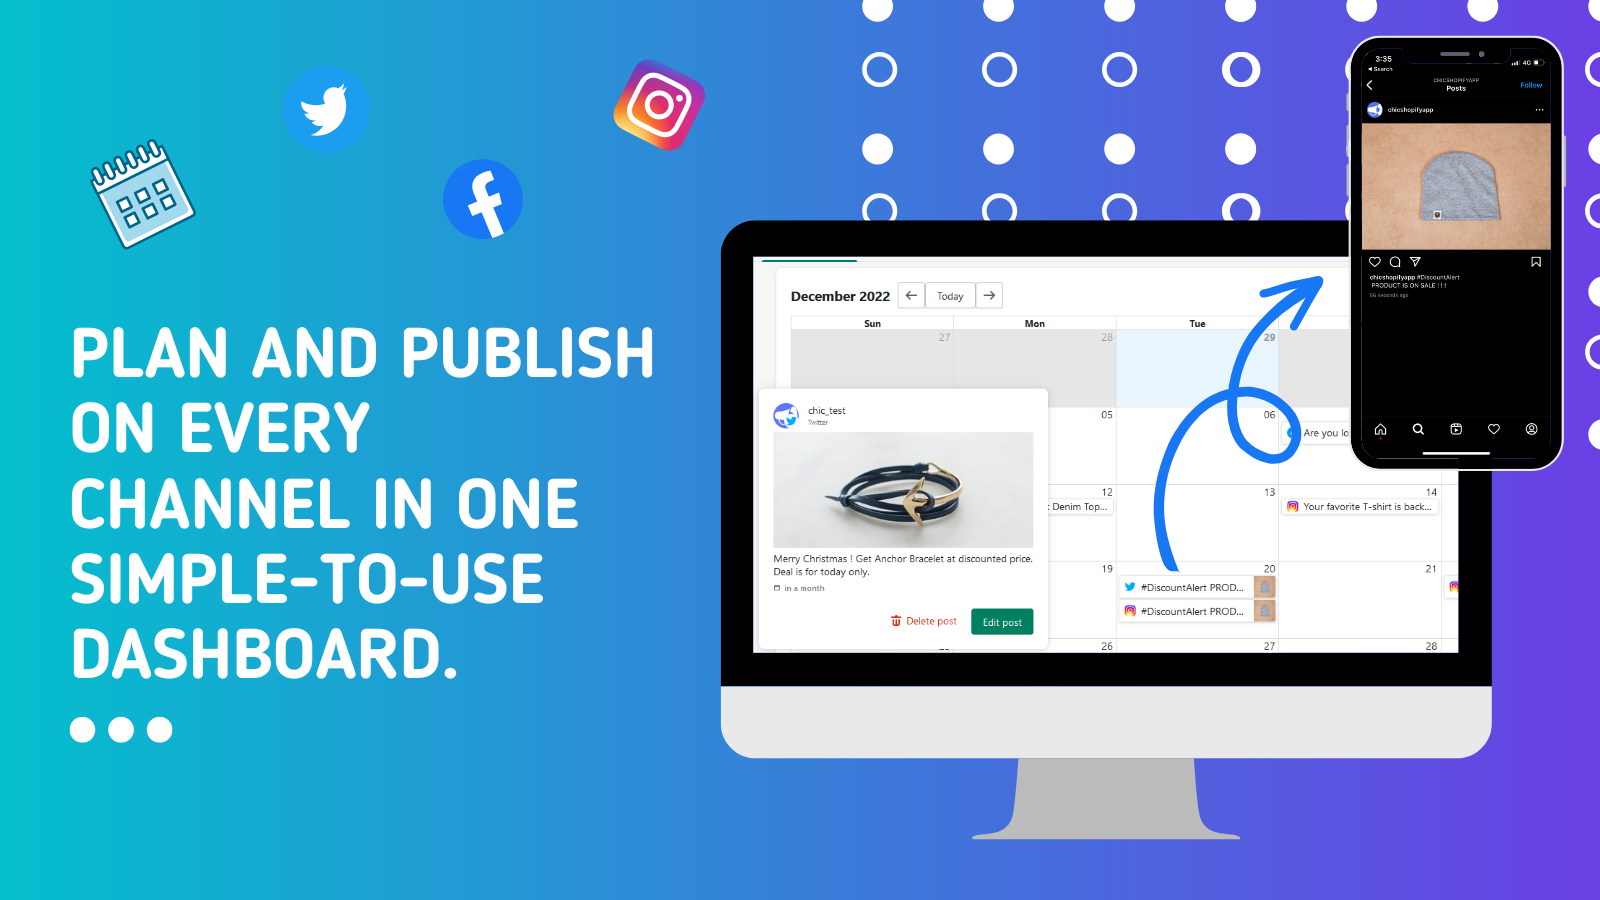 Plan and publish on every channel in one simple-to-use dashboard